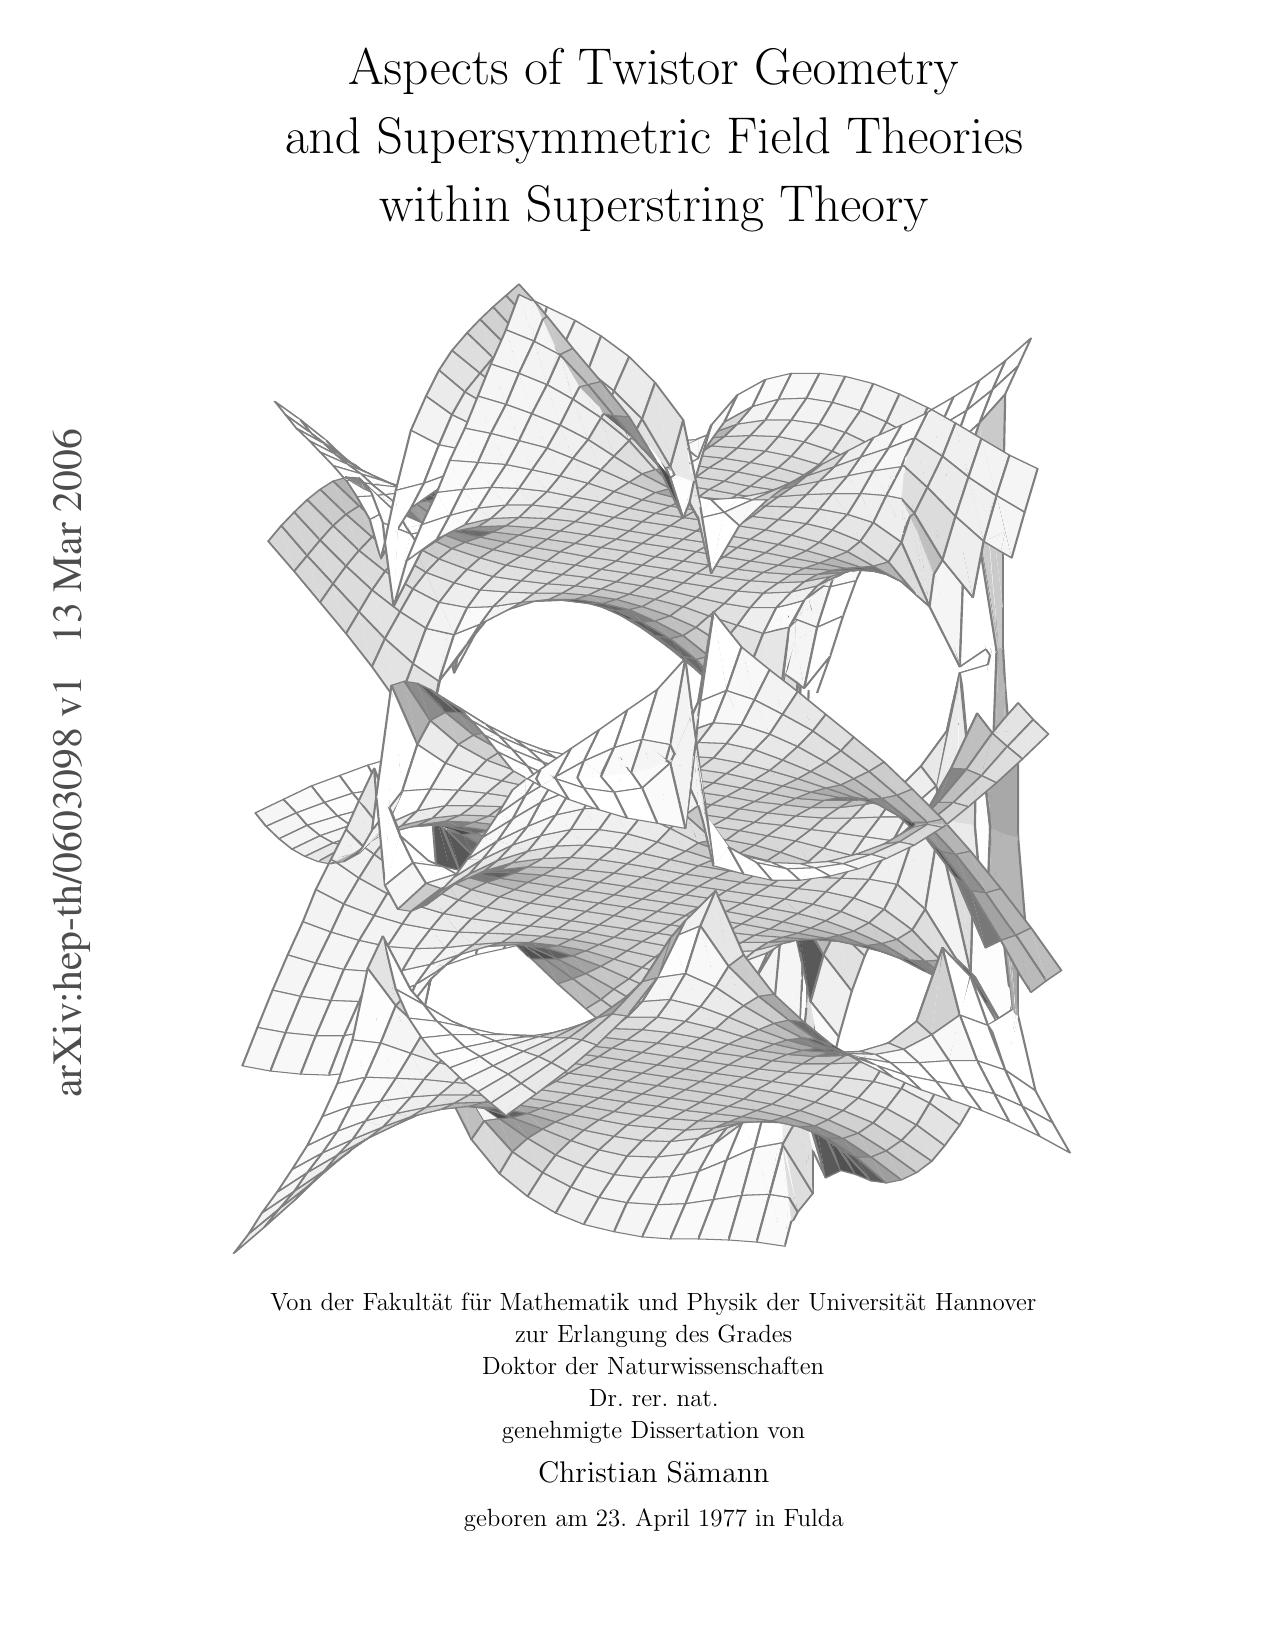 Twistor Geometry, Supersymmetric Field Theories in Supertring Theory - Paper